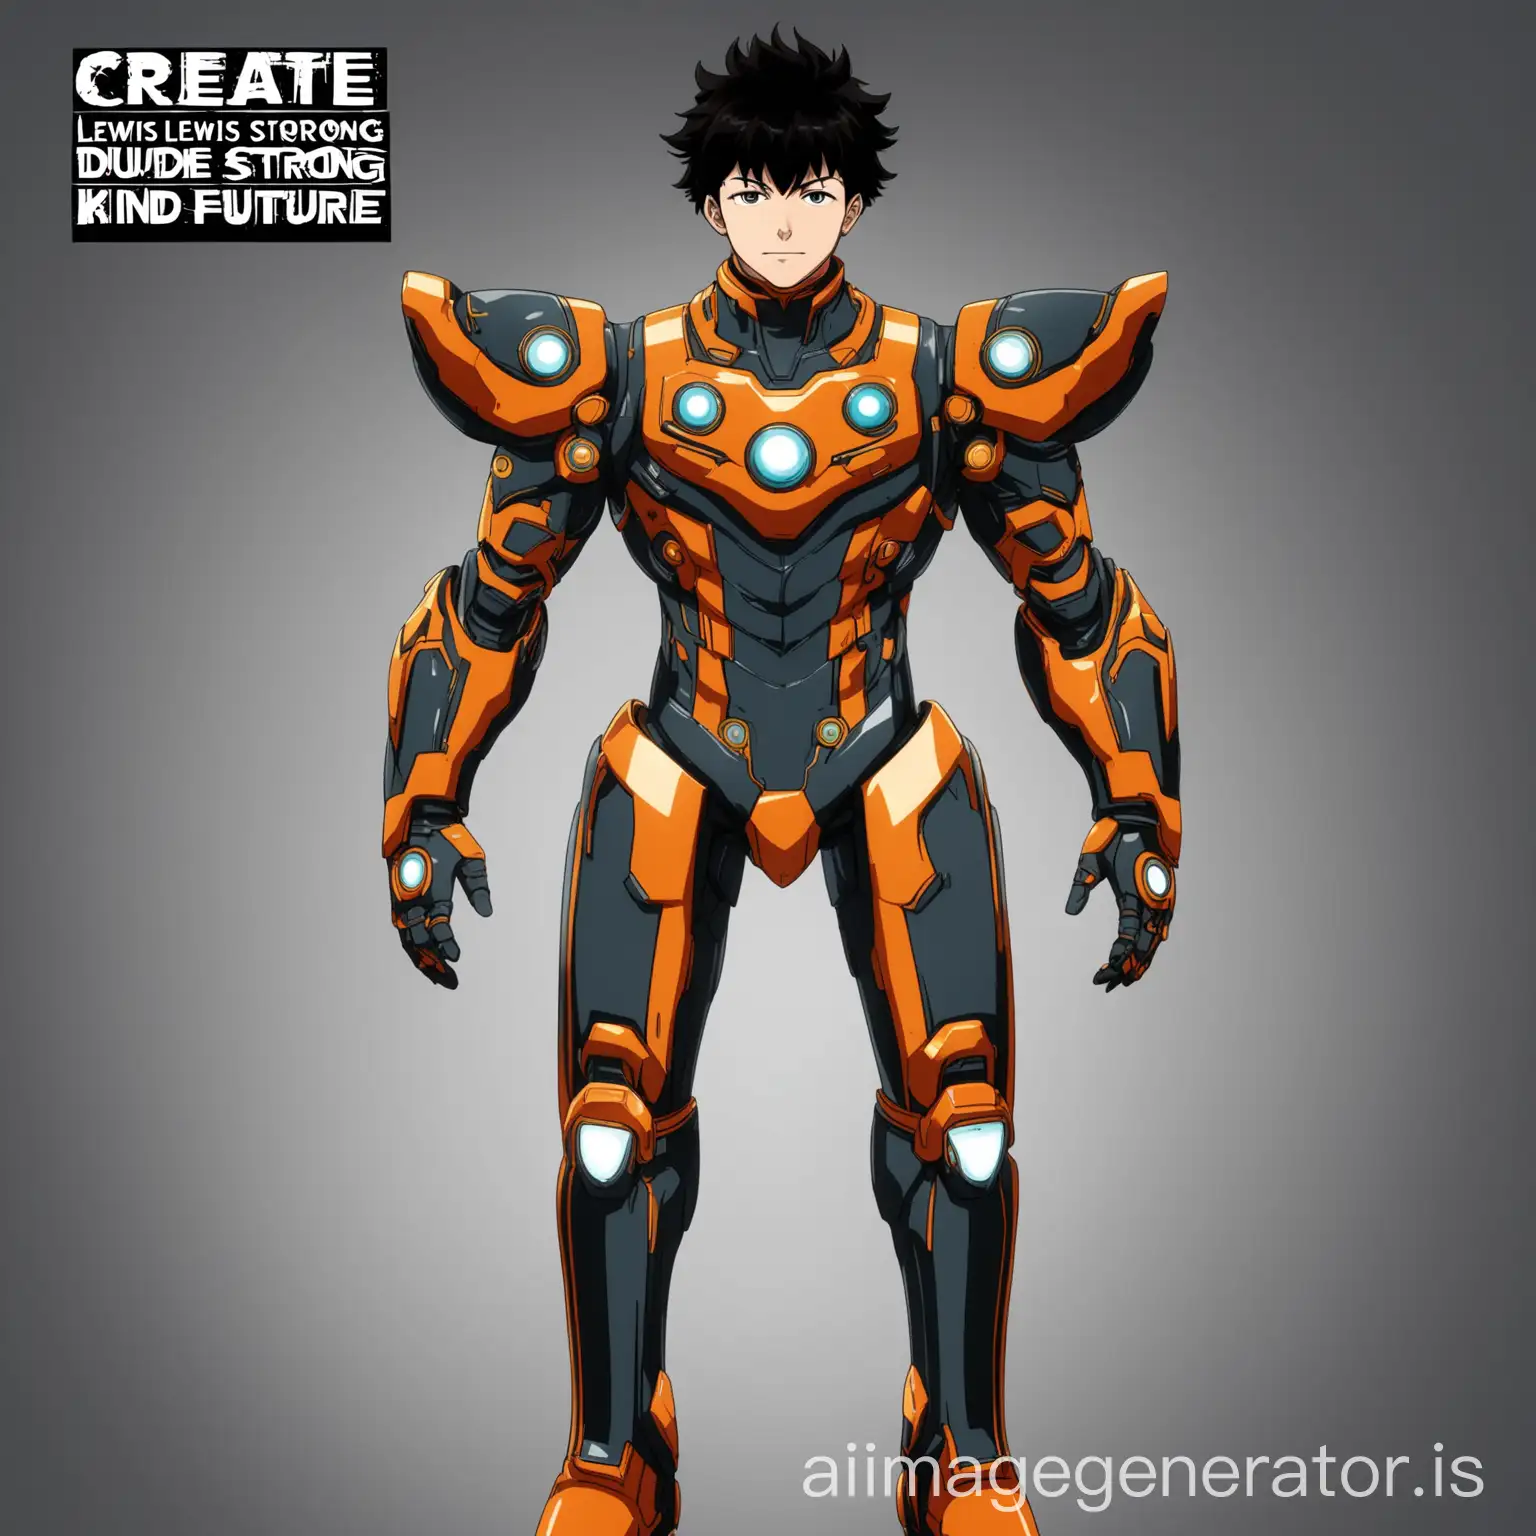 create a dude name Lewis strong brave kind Future suit anime